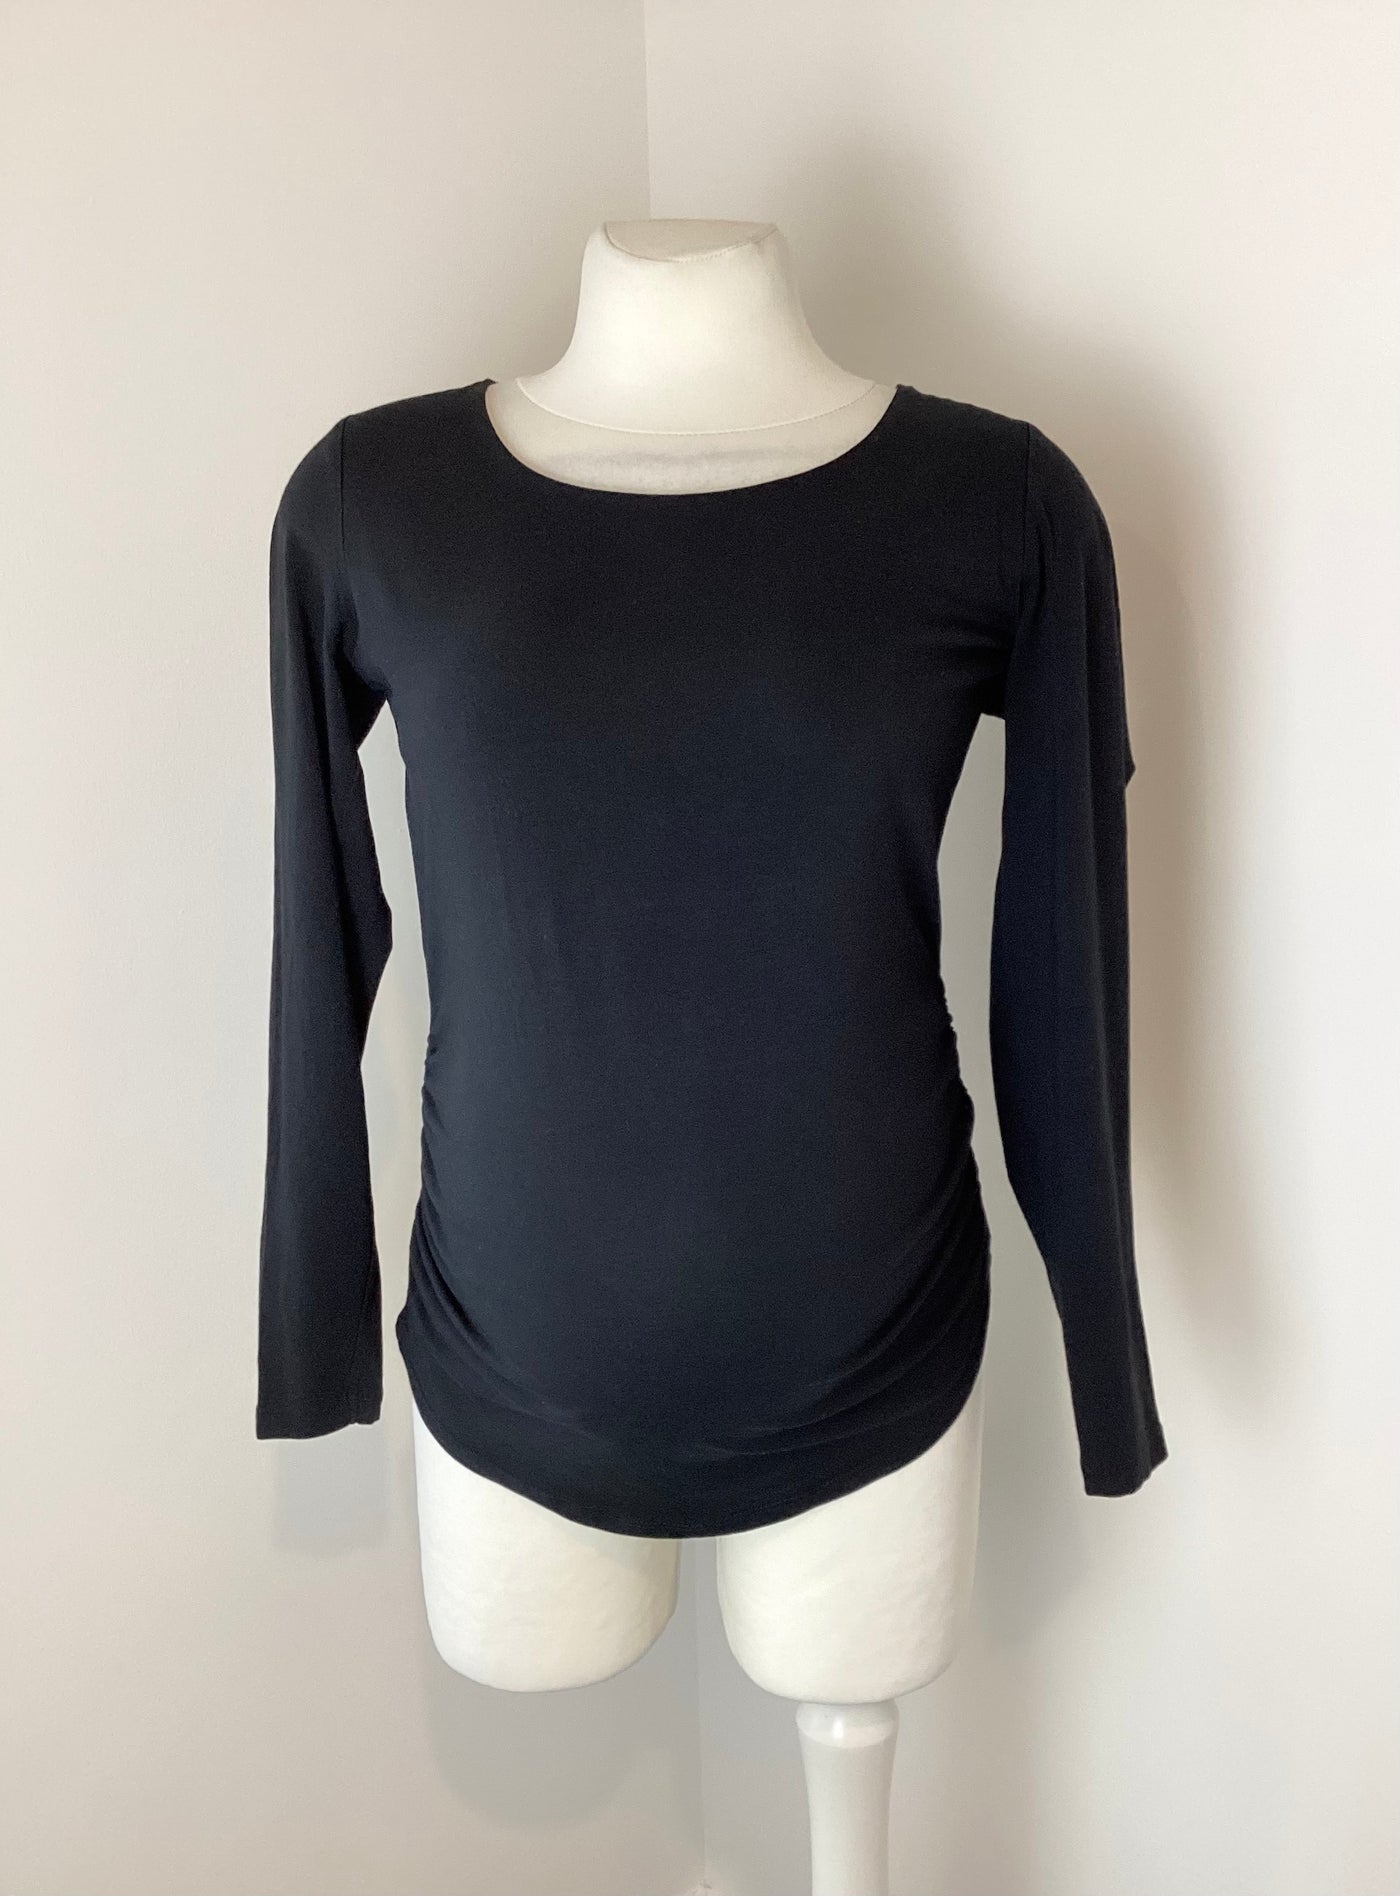 Marks & Spencer black long sleeved maternity top - Size S (Approx UK 8/10)